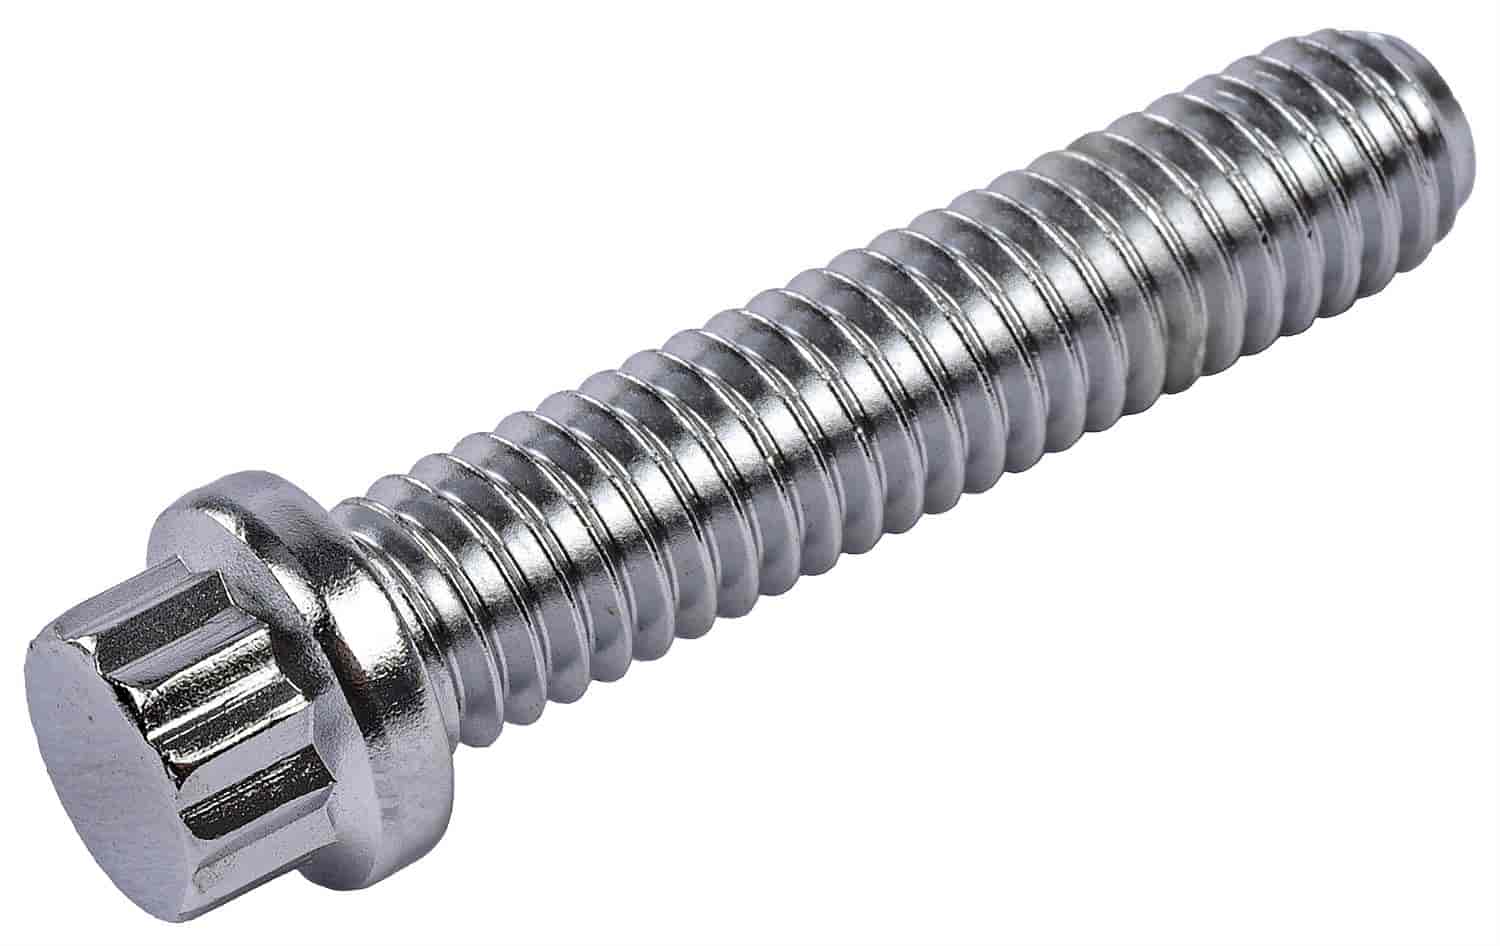 12-Point Fastener [5/16 in. -18 Thread x 1 1/2 (.500) in. Length]